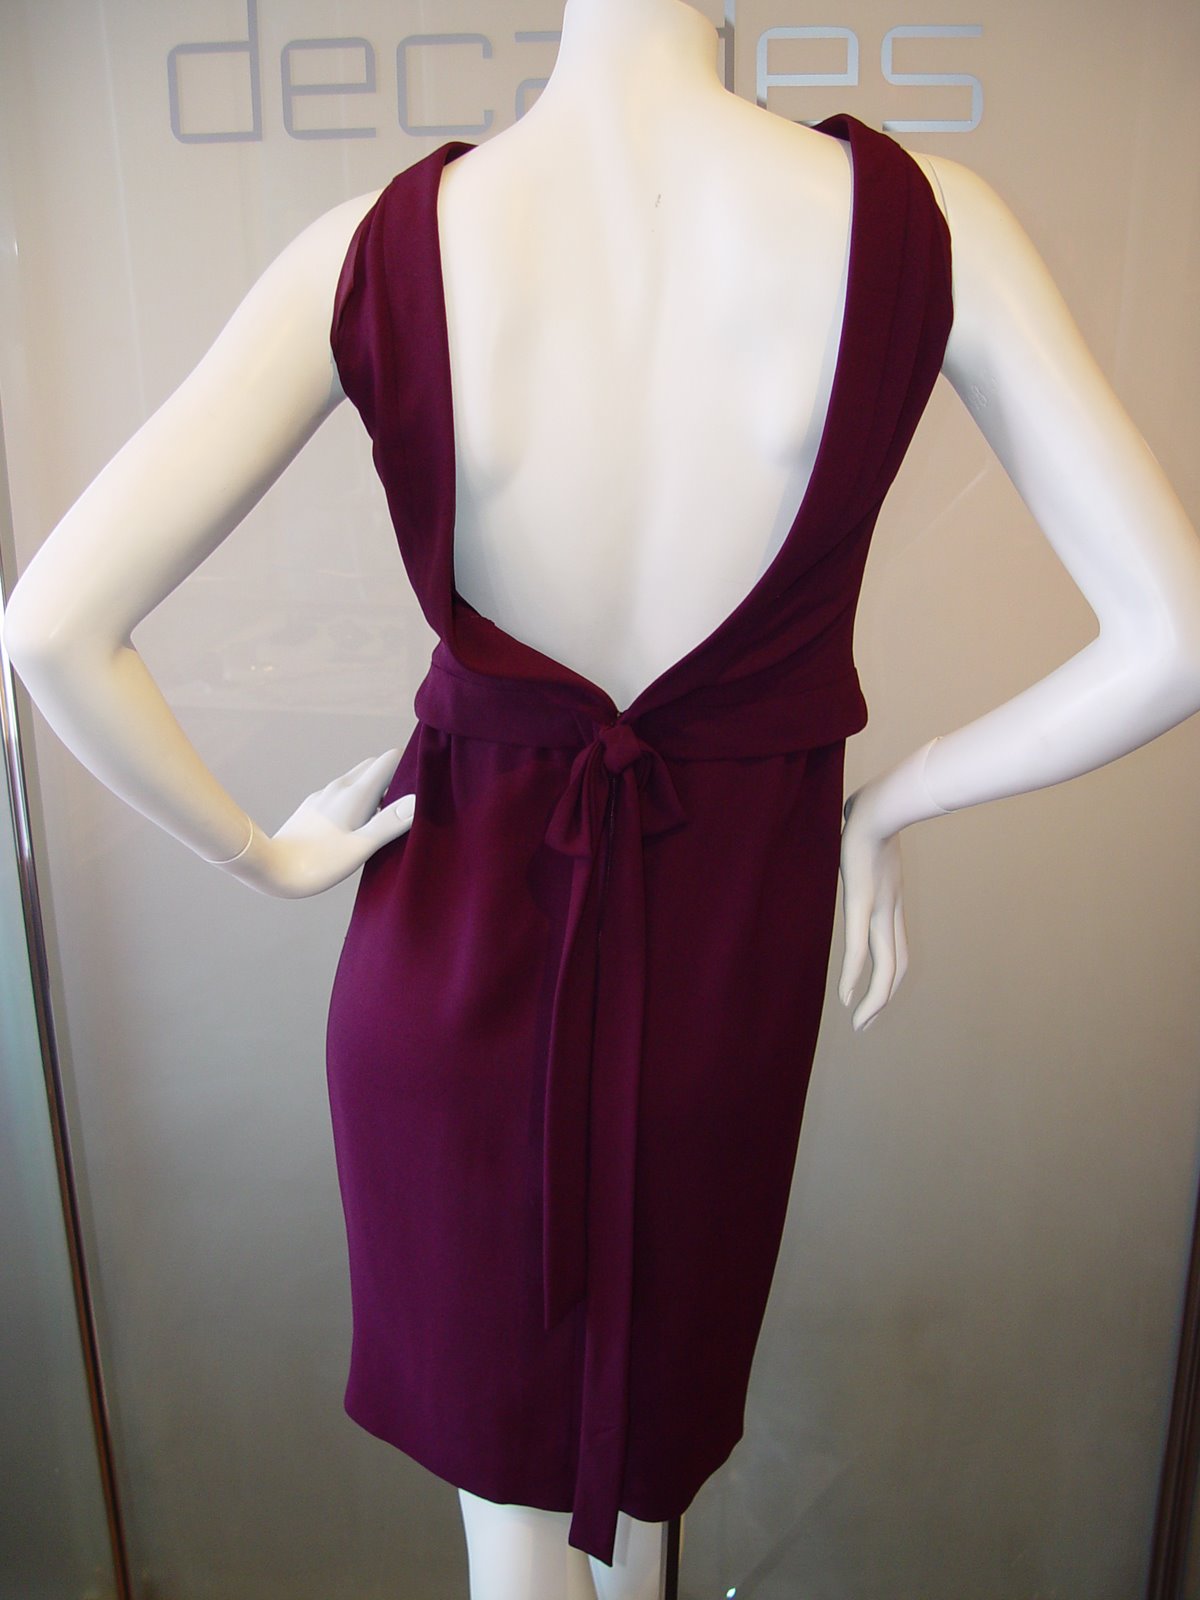 [PIERRE+CARDIN+COUTURE+AUBERGINE+TWO+PIECE+EFFECT+WITH+BACKLESS+DESIGN+C+60S.JPG+(1).JPG]